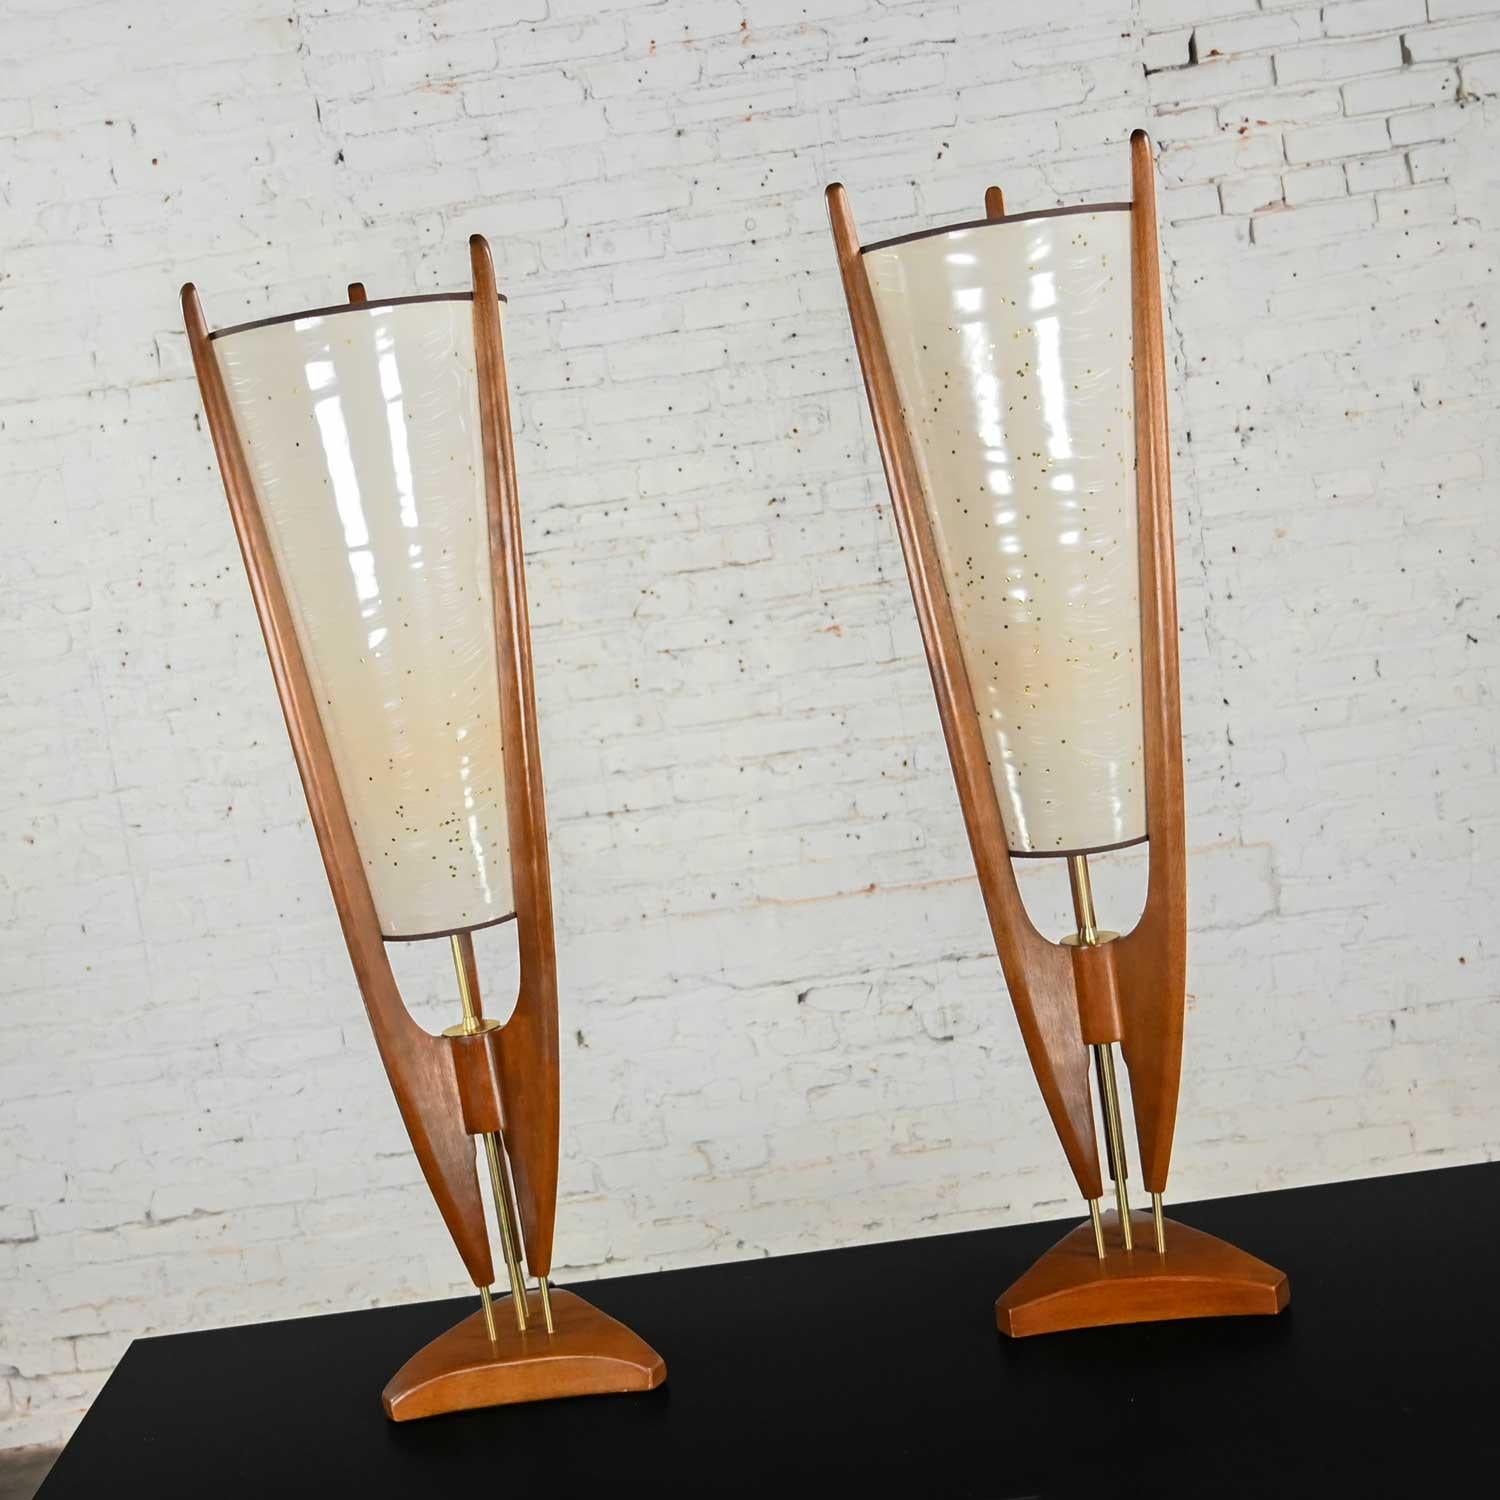 Stunning vintage mid-century modern sculpted cone table lamps by Arthur Jacobs for Modeline. Comprised of korina wood, brass stems, and original plastic cone shades. Beautiful condition, keeping in mind that these are vintage and not new so will